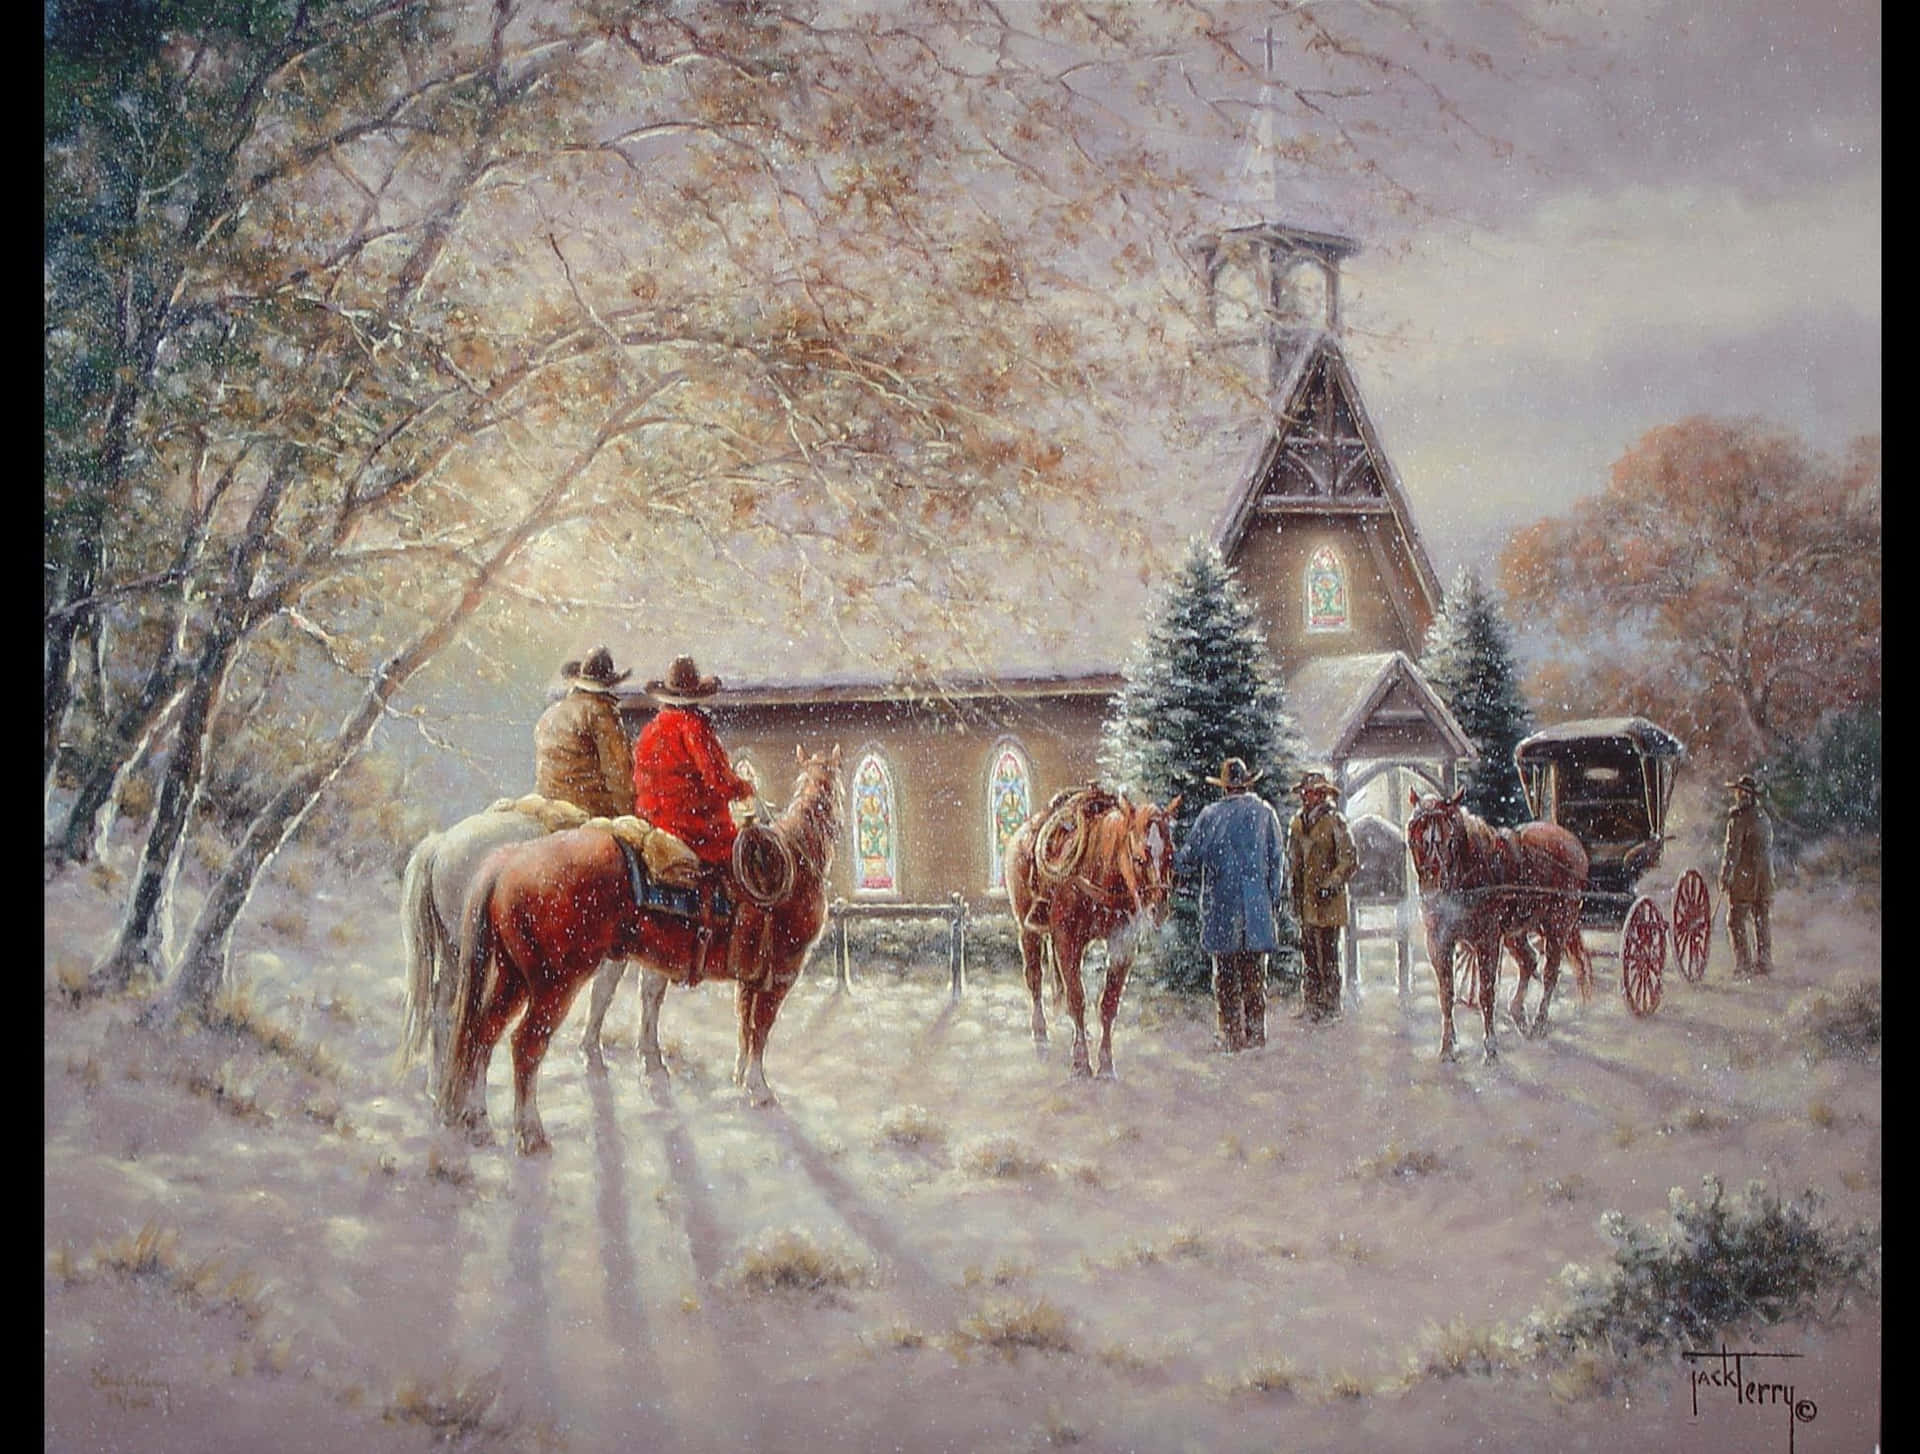 "Western Lifestyle in Harmony with the Holiday Season" Wallpaper